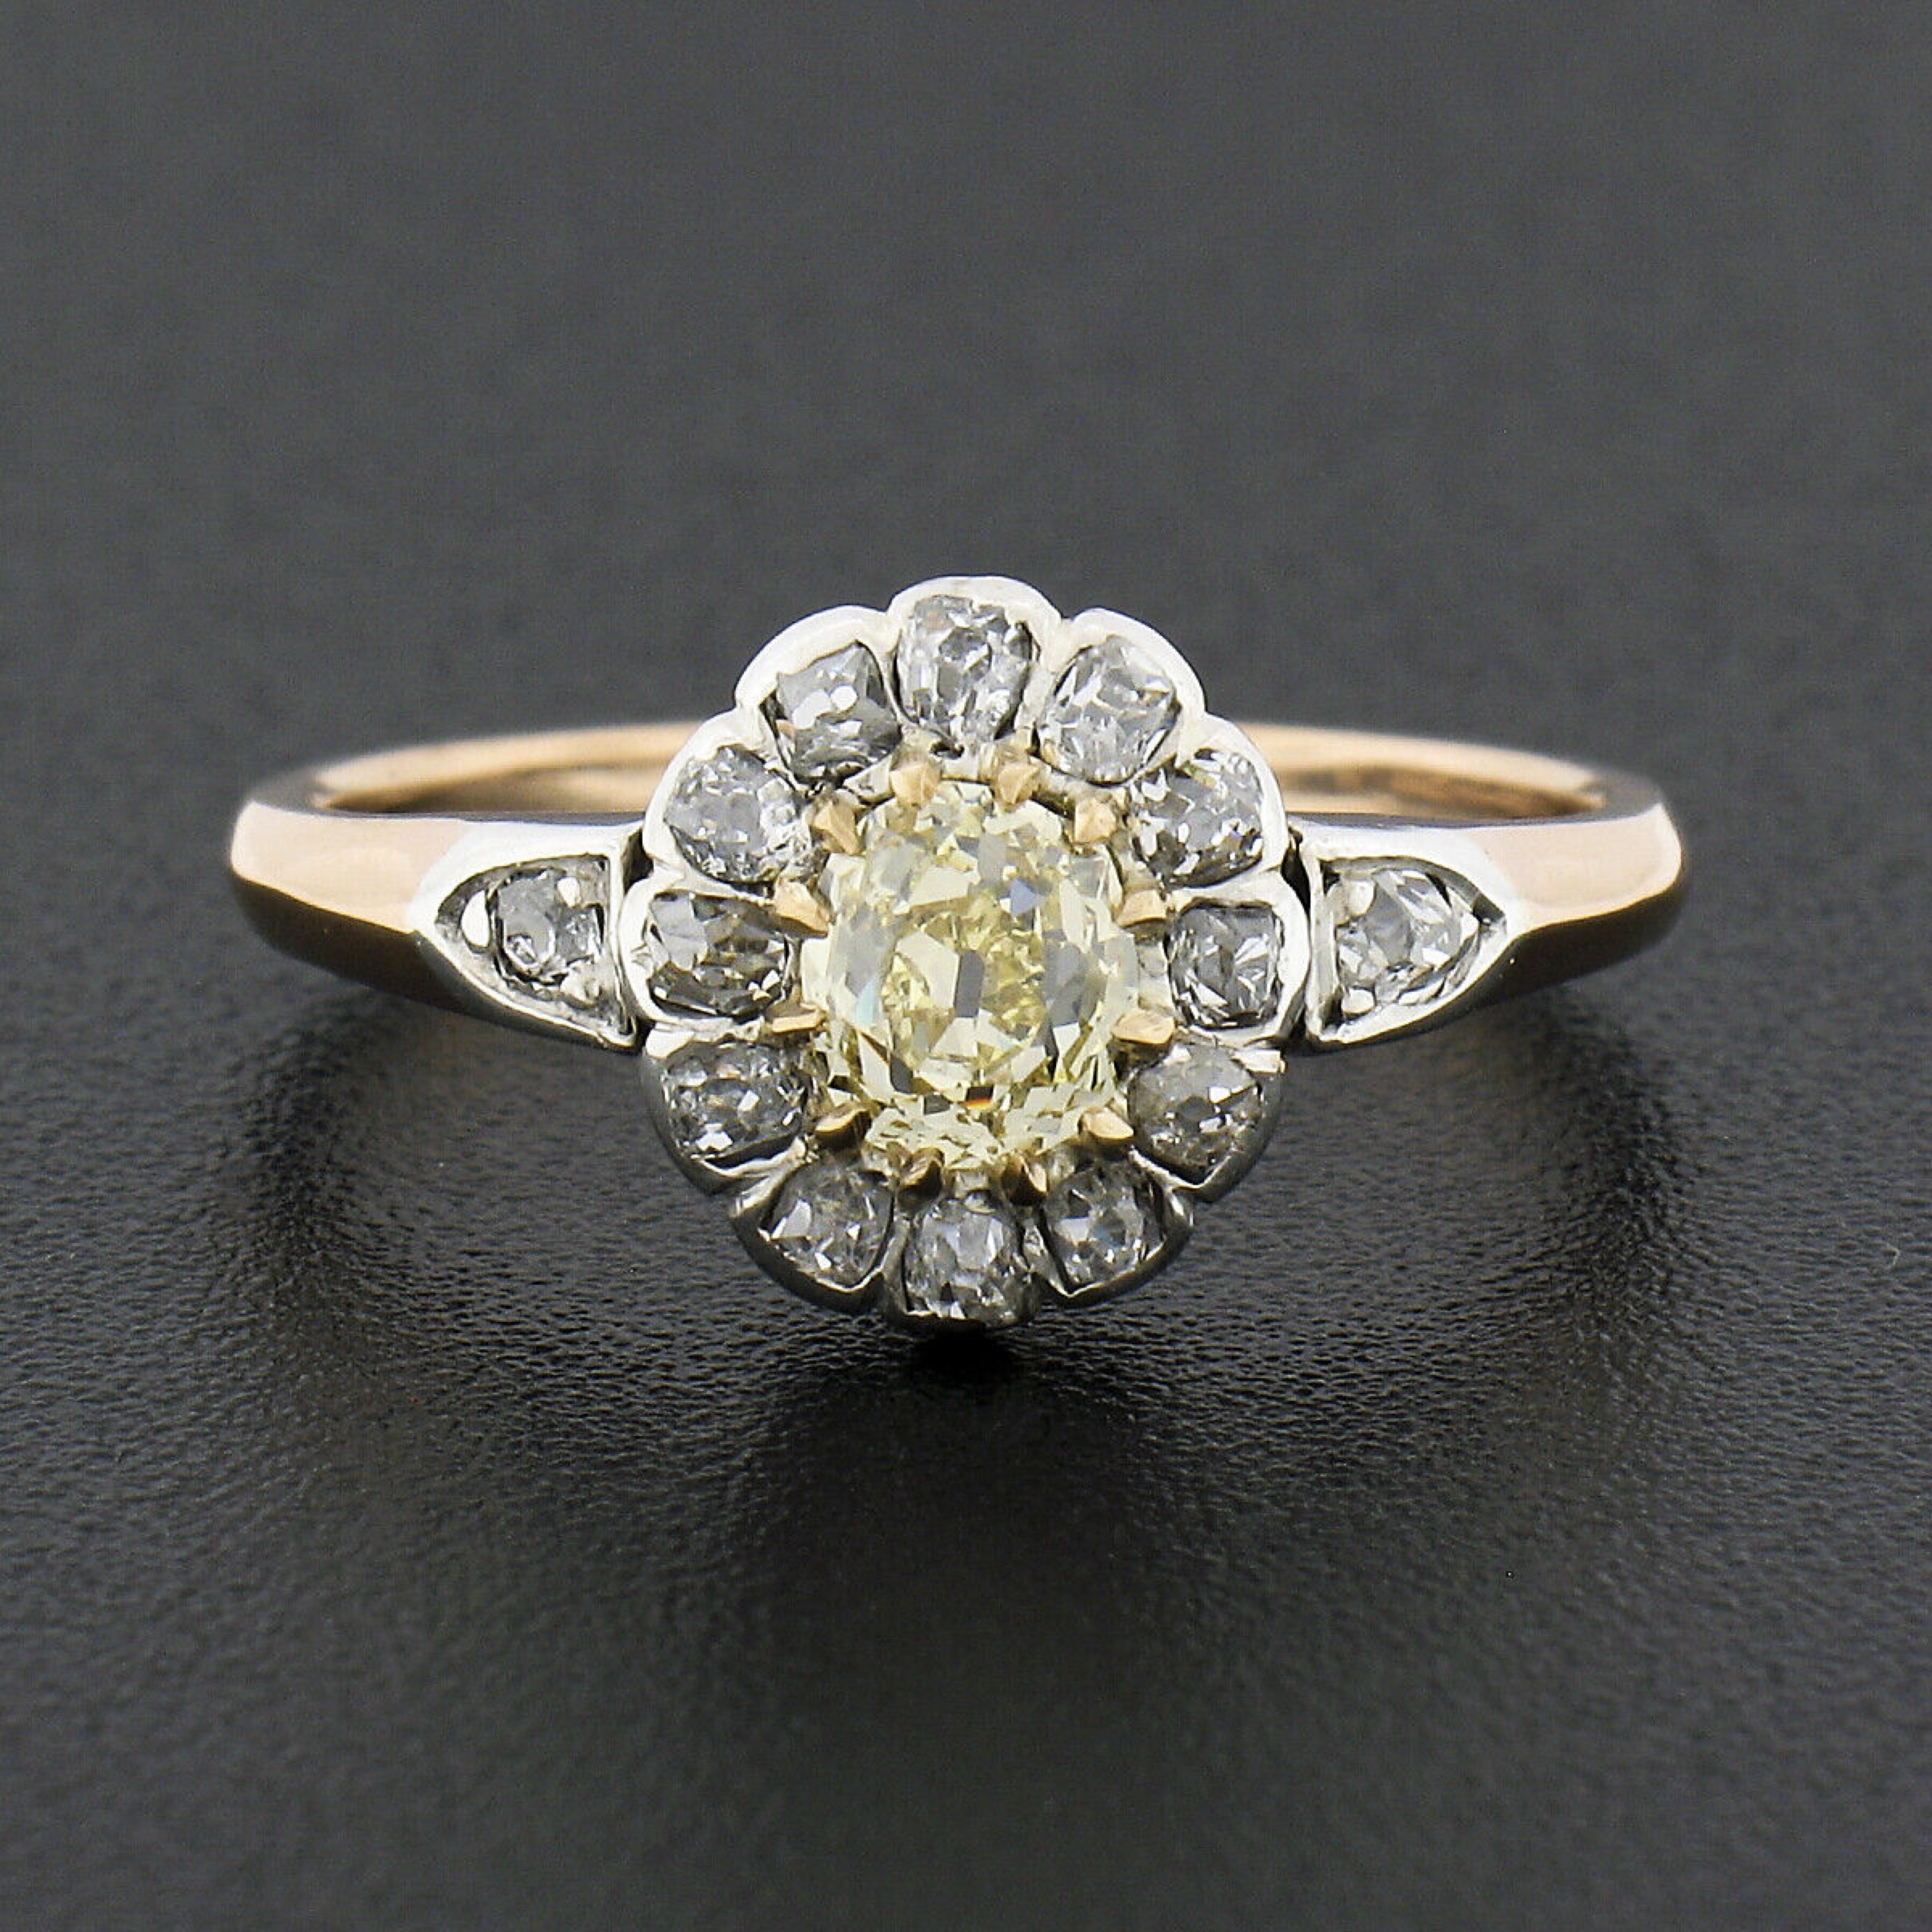 This truly gorgeous antique ring was crafted during the Georgian era from solid 18k gold with a silver top. It features a lovely flower cluster design set with a, GIA certified, natural fancy light yellow diamond at its center. This gorgeous center